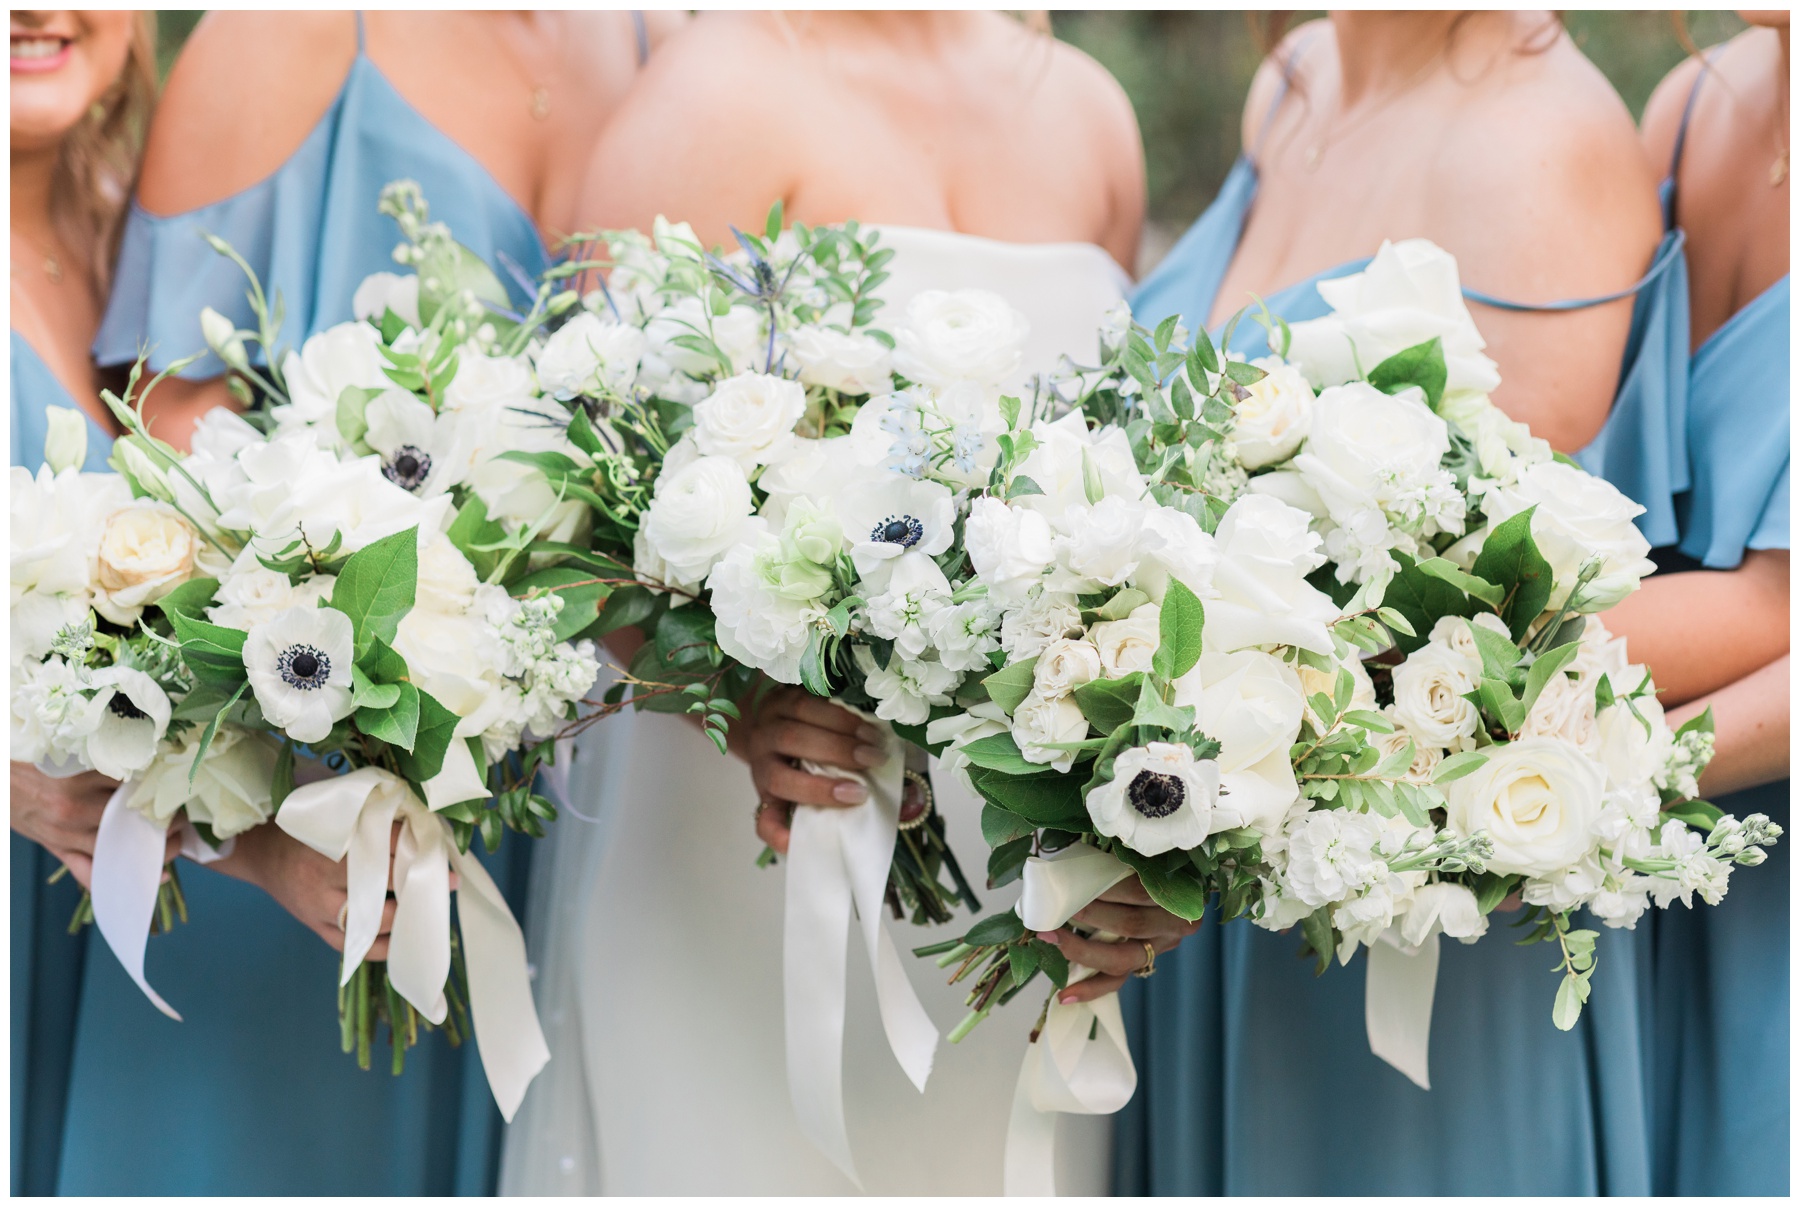 All white wedding bouquets with anemonies